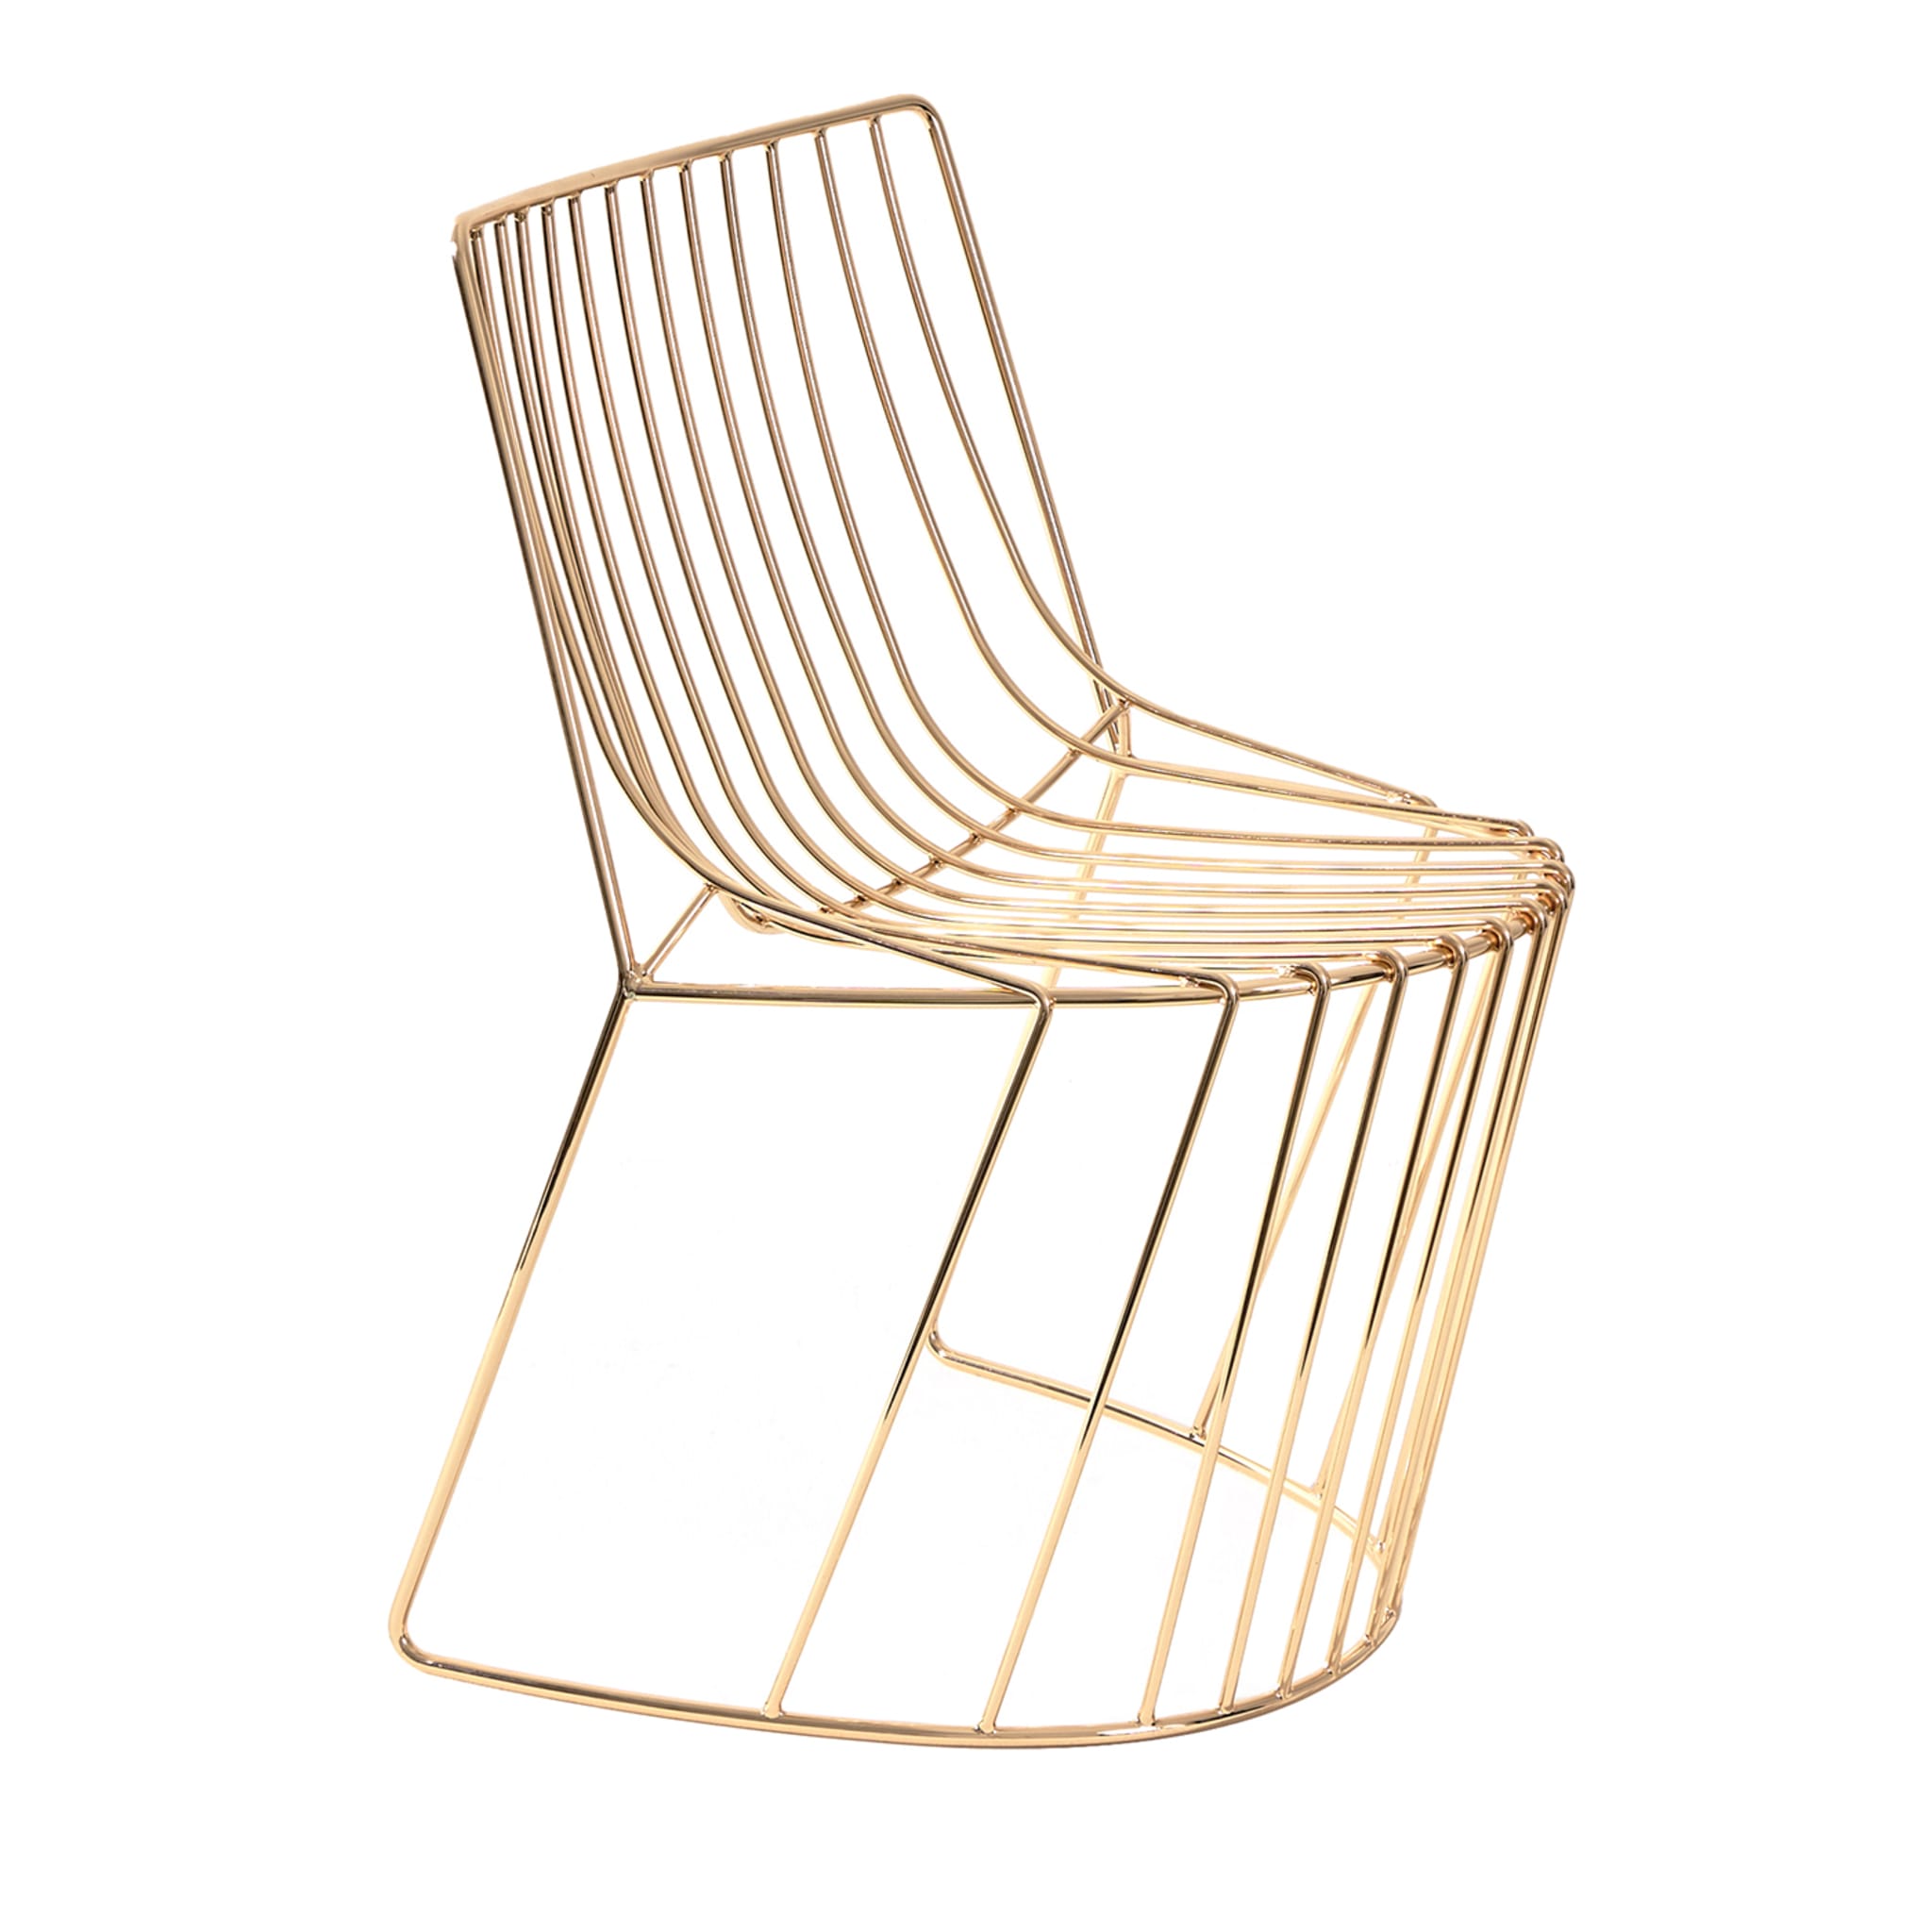 AMARONE LIGHT GOLD POLISHED CHAIR - Vue principale